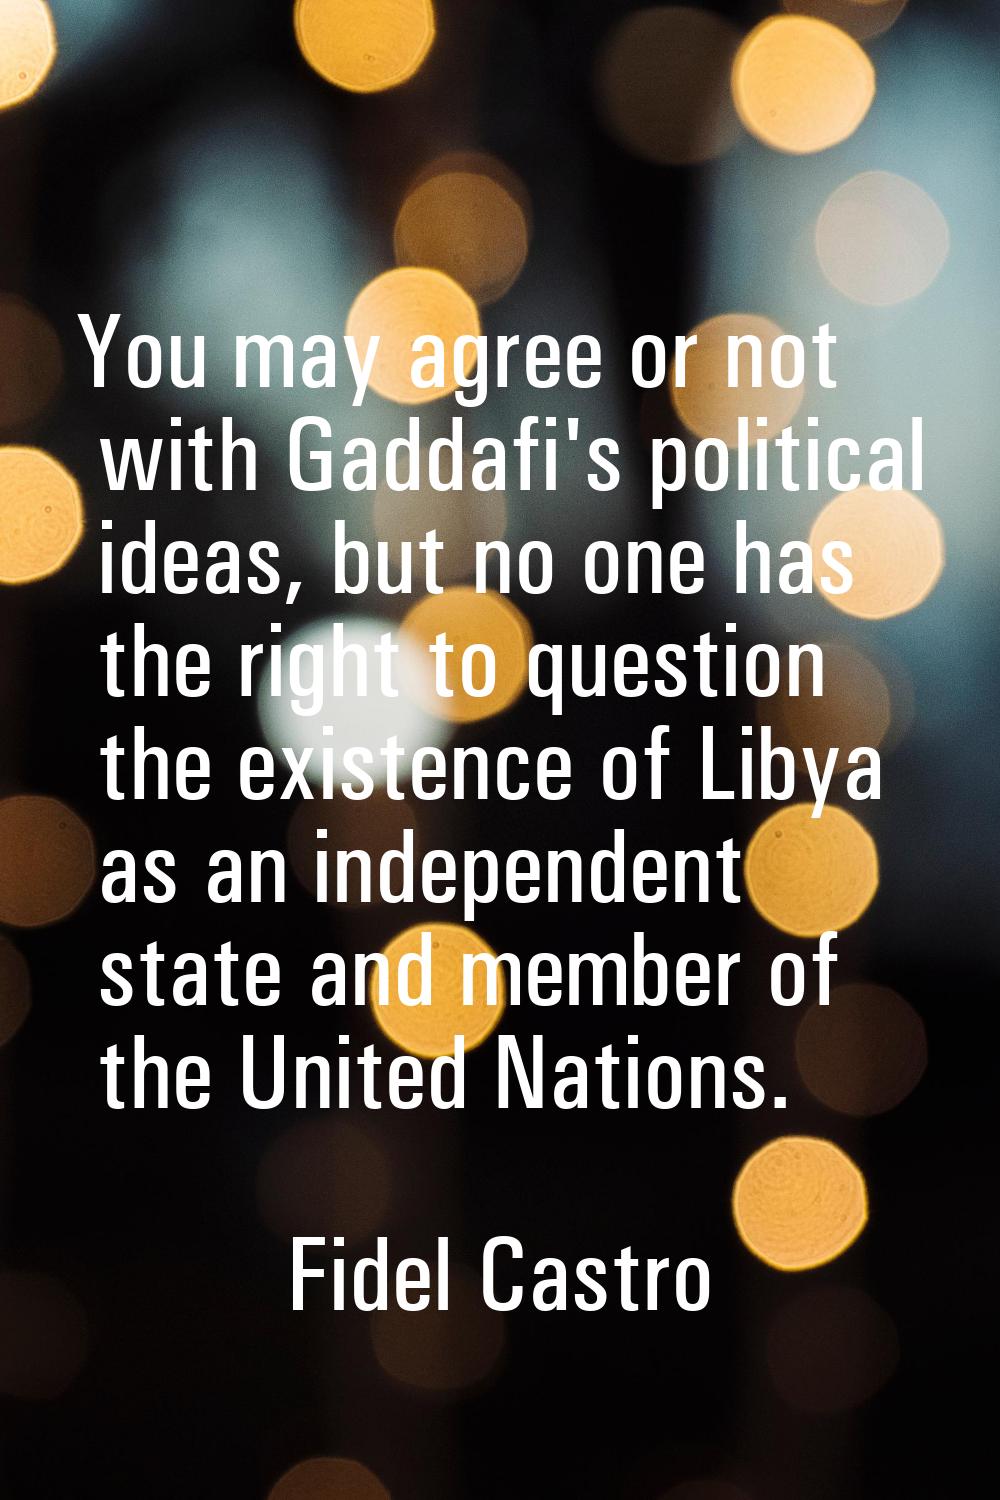 You may agree or not with Gaddafi's political ideas, but no one has the right to question the exist